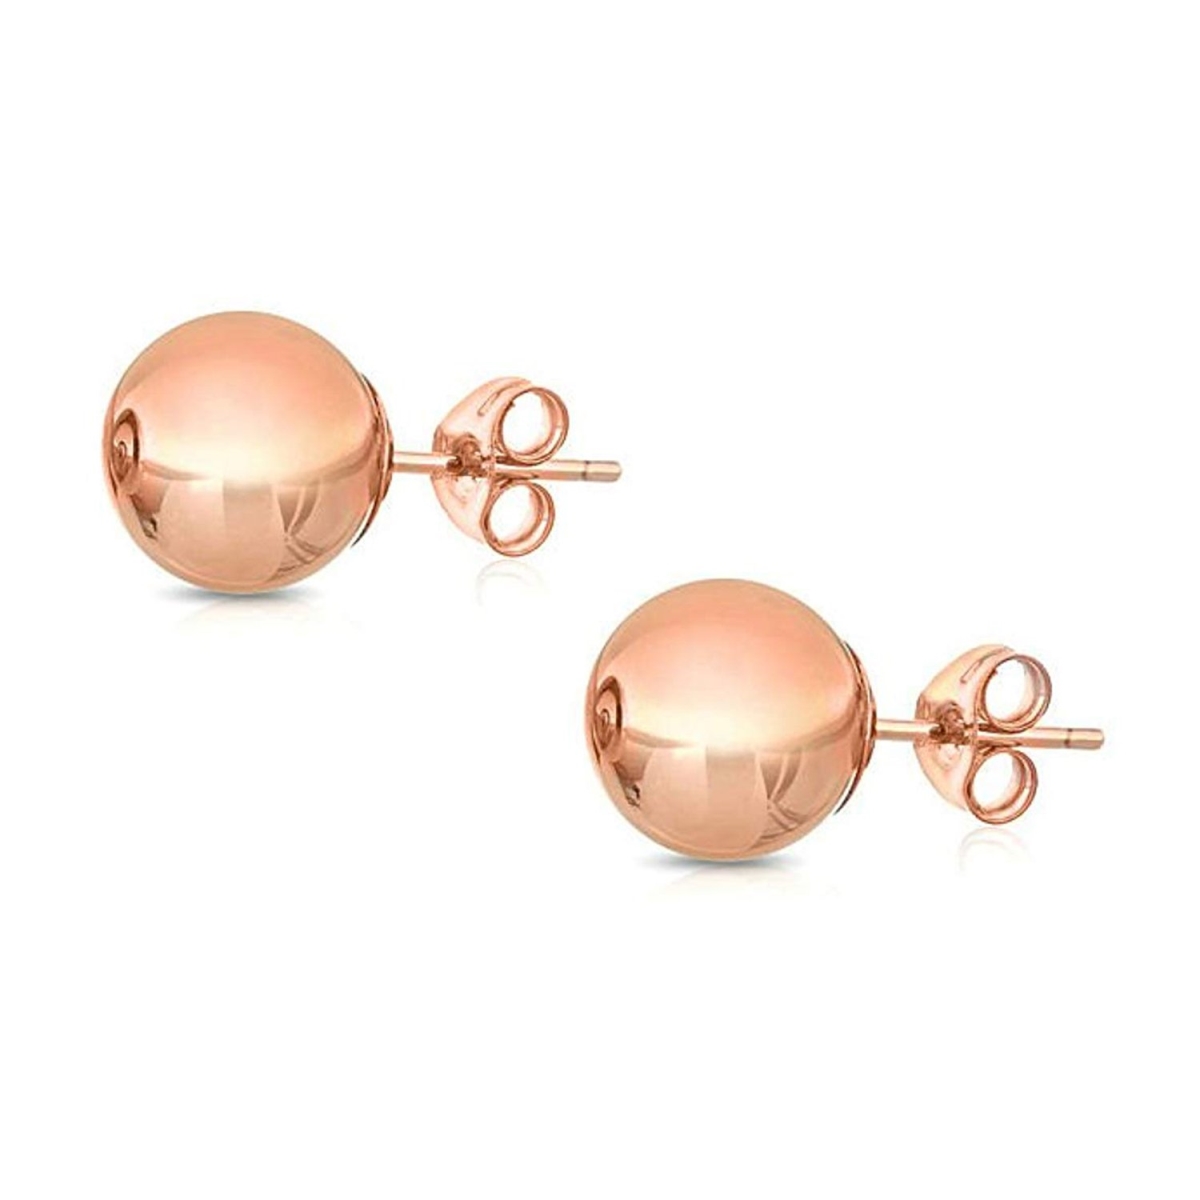 Picture of Alily Jewelry HAI-E073-ROSE 6 mm Classic Ball Stud Earring in 14K Rose Gold Plated